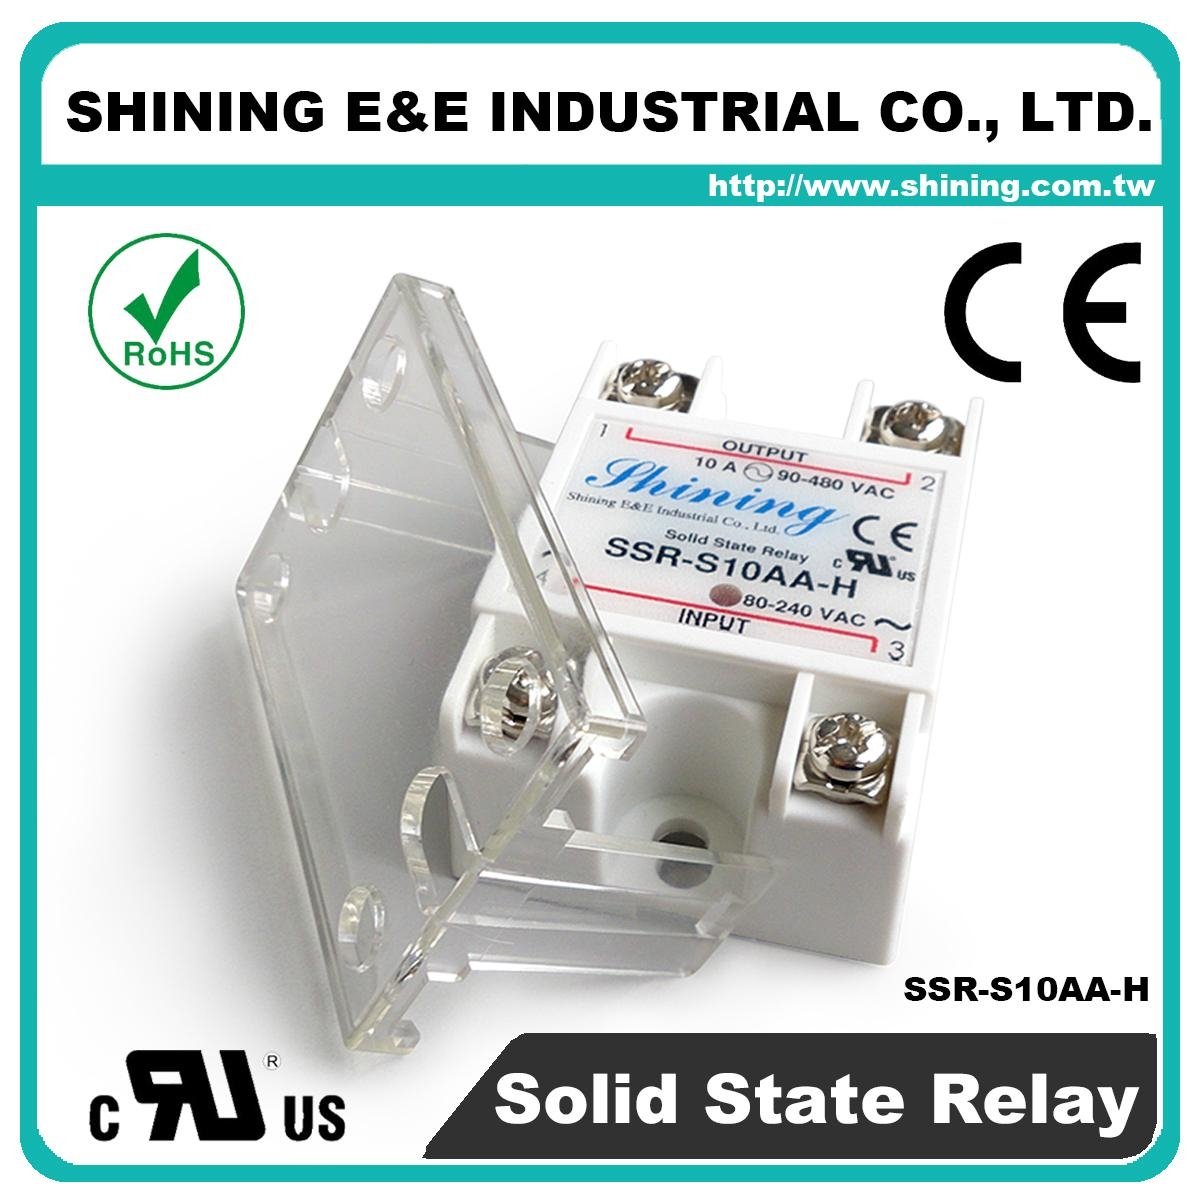 SSR-S10AA-H Single Phase 10Amp AC to AC Solid State Relay ( SSR ) 5